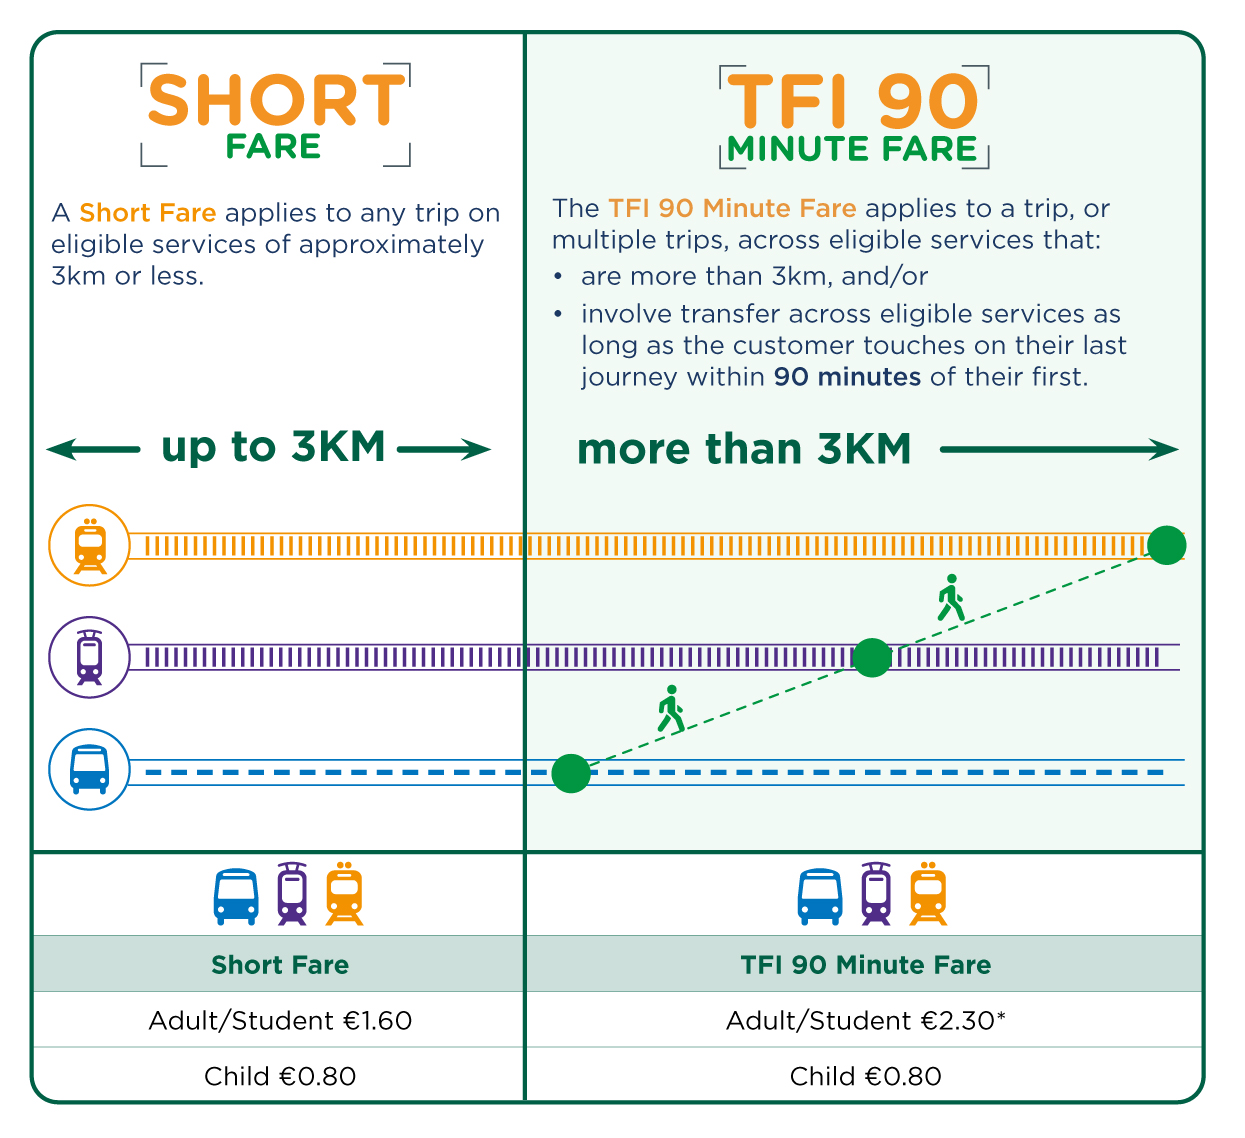 Infographic outlining the difference between a short fare and TFI 90 minute fare